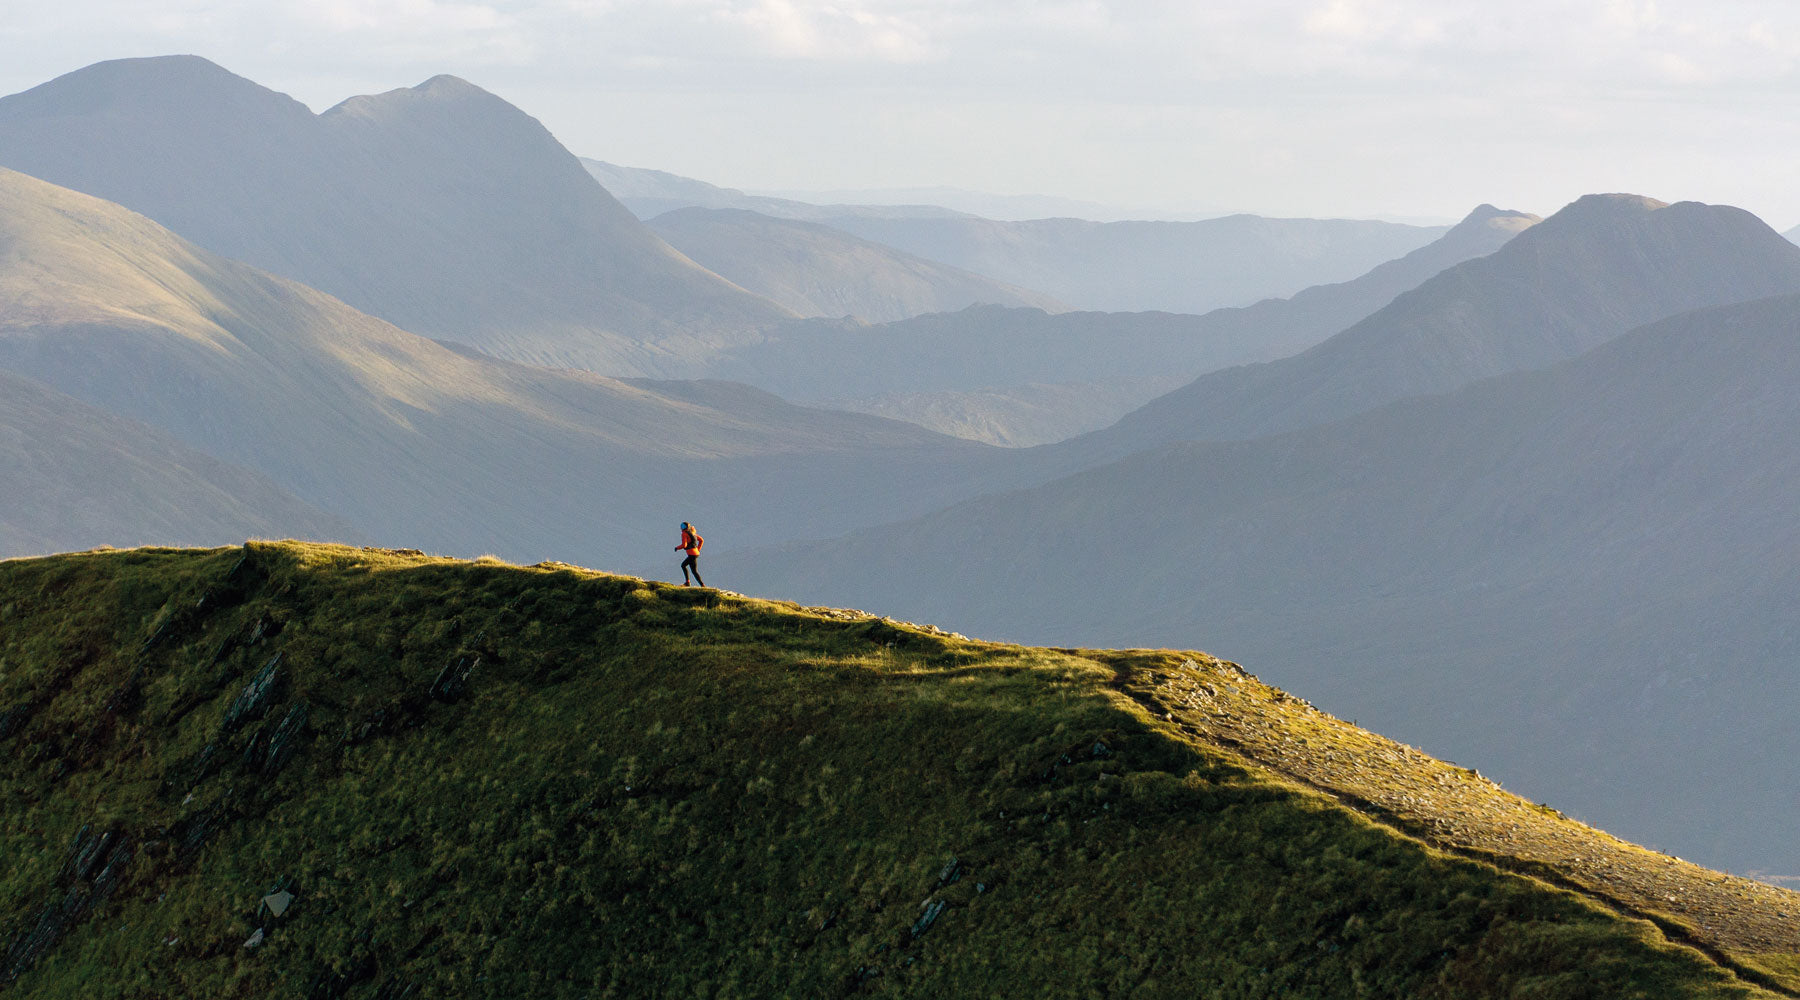 Suzy Devey on the South Glen Shiel Ridge, photo by by Finlay-Wild. Appears on the cover of Running Challenges by Keri Wallace.